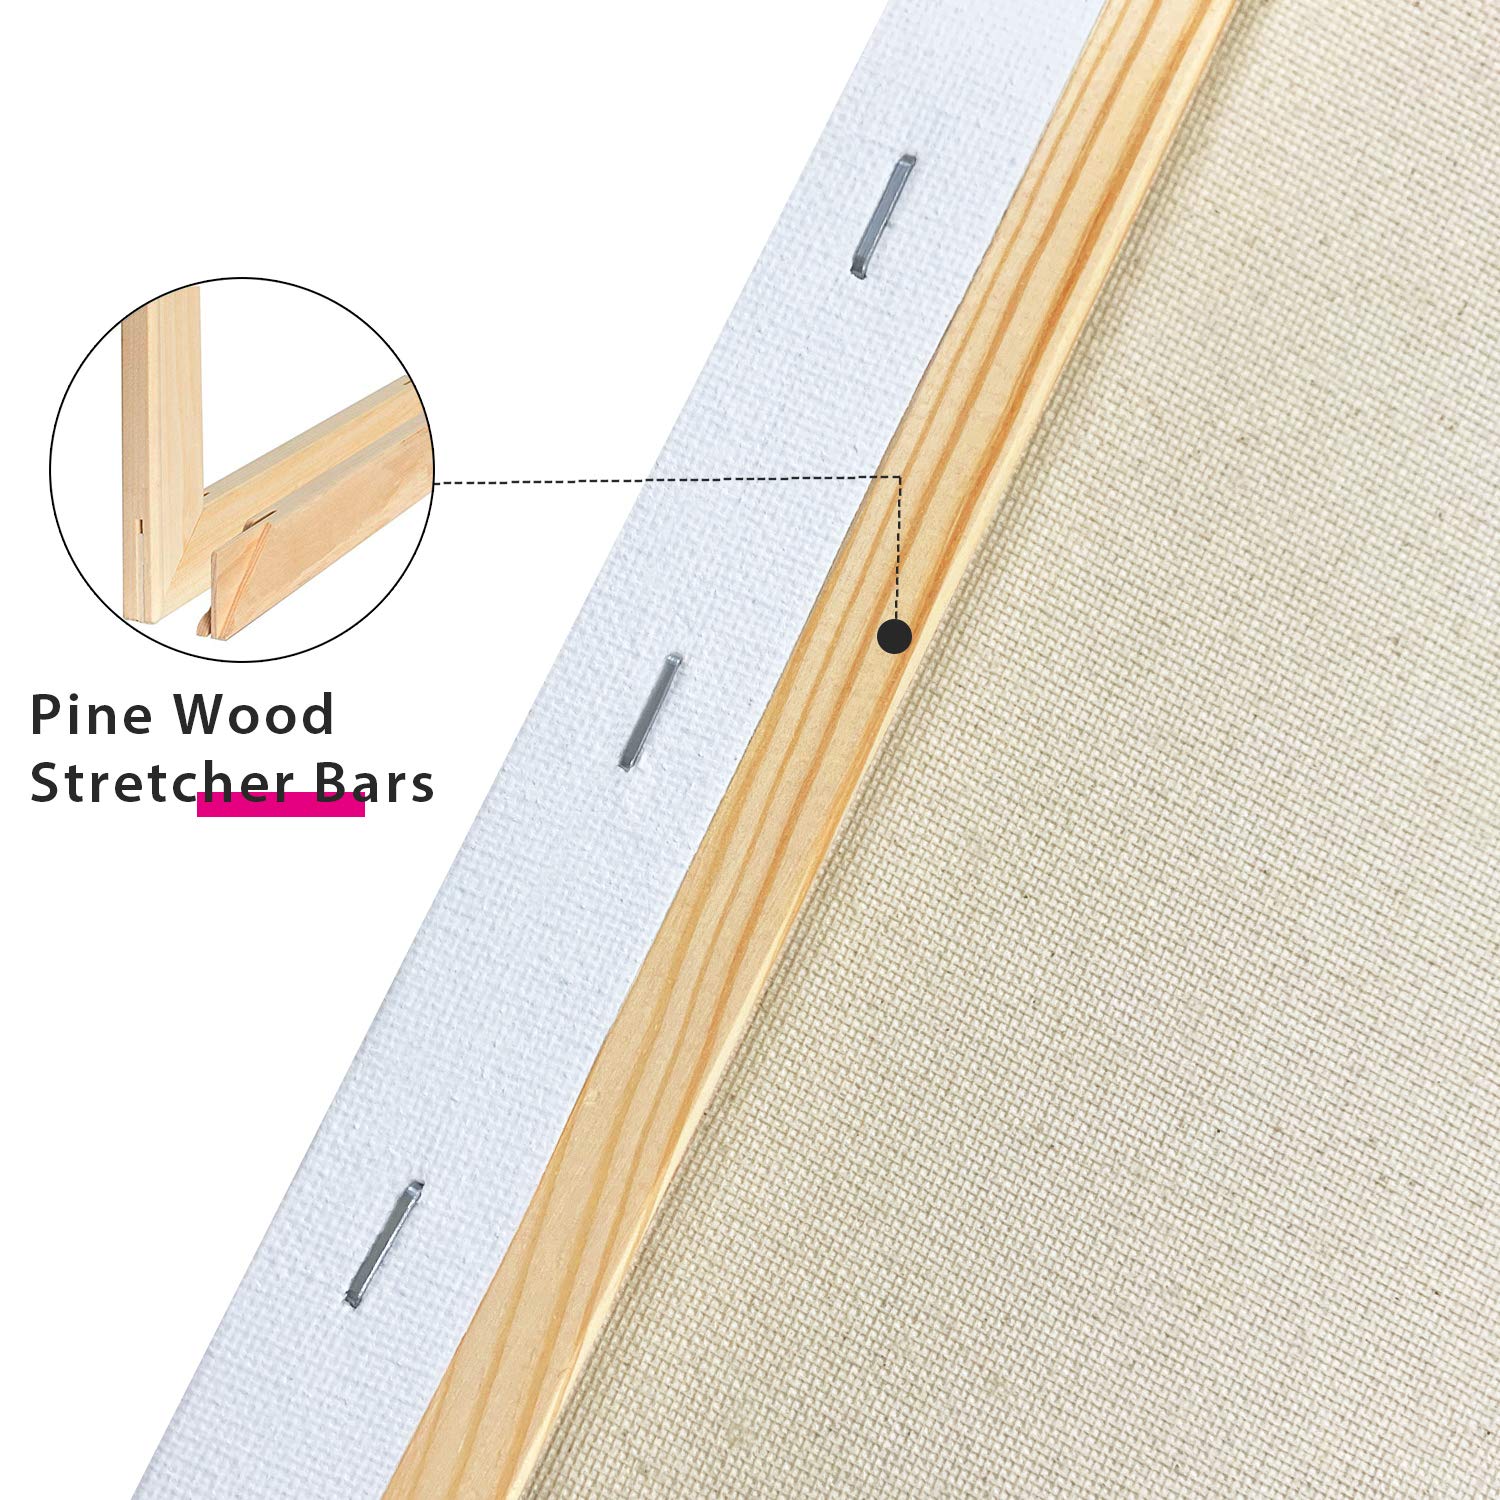 PHOENIX Watercolor Stretched Canvases, 16x20 Inch/4 Pack - 8 Oz, 3/4 Inch Profile, 100% Cotton Triple Primed White Blank Canvases for Watercolor, Acrylic, Gouache, Tempera, Crafts & Pouring Art